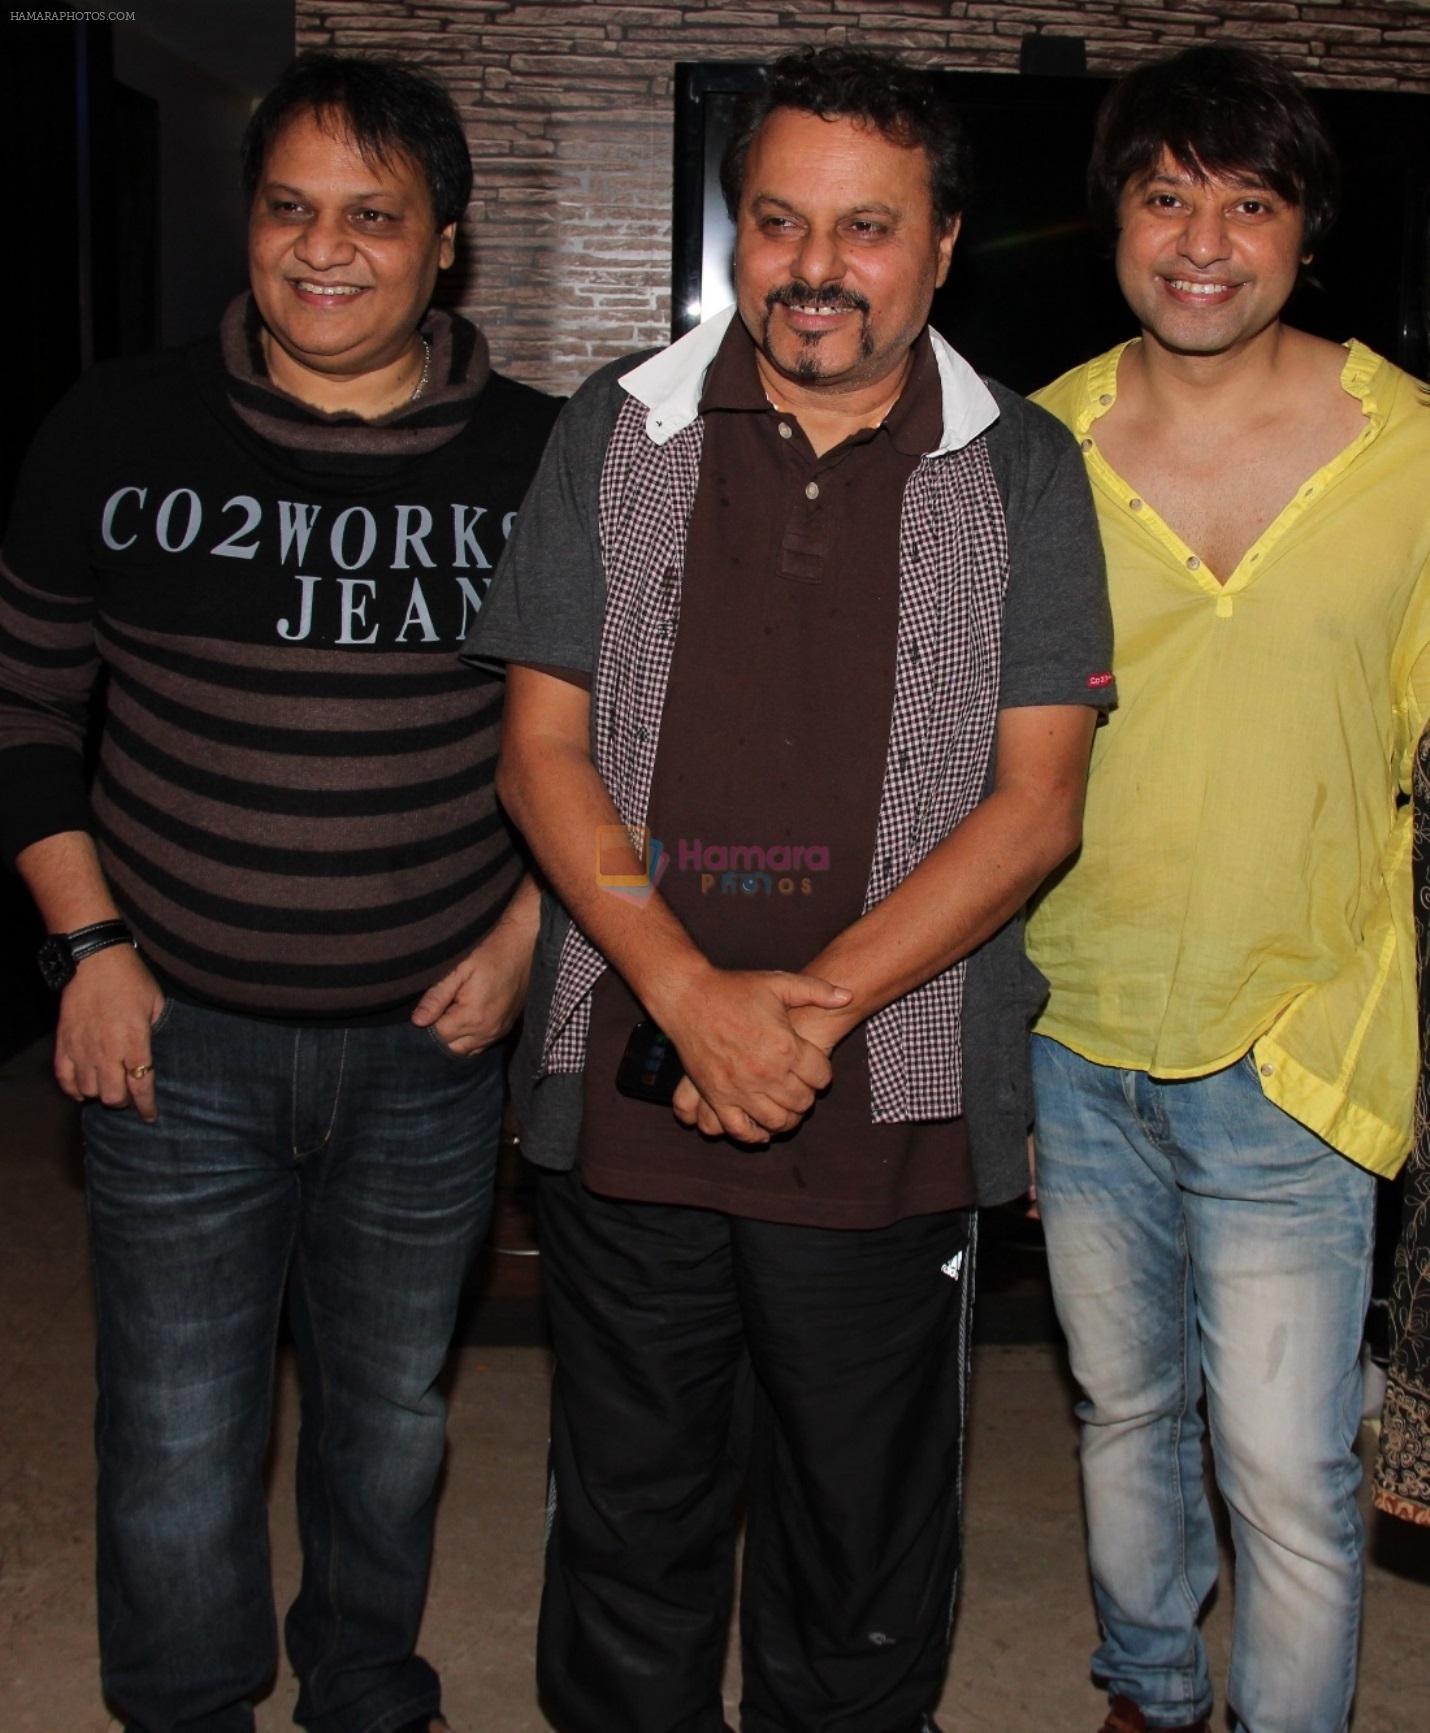 brothers in arms... Sanjay Sharma, Anil sharma and Kapil Sharma at Sanjay Sharma's birthday bash in Mumbai on 13th March 2013